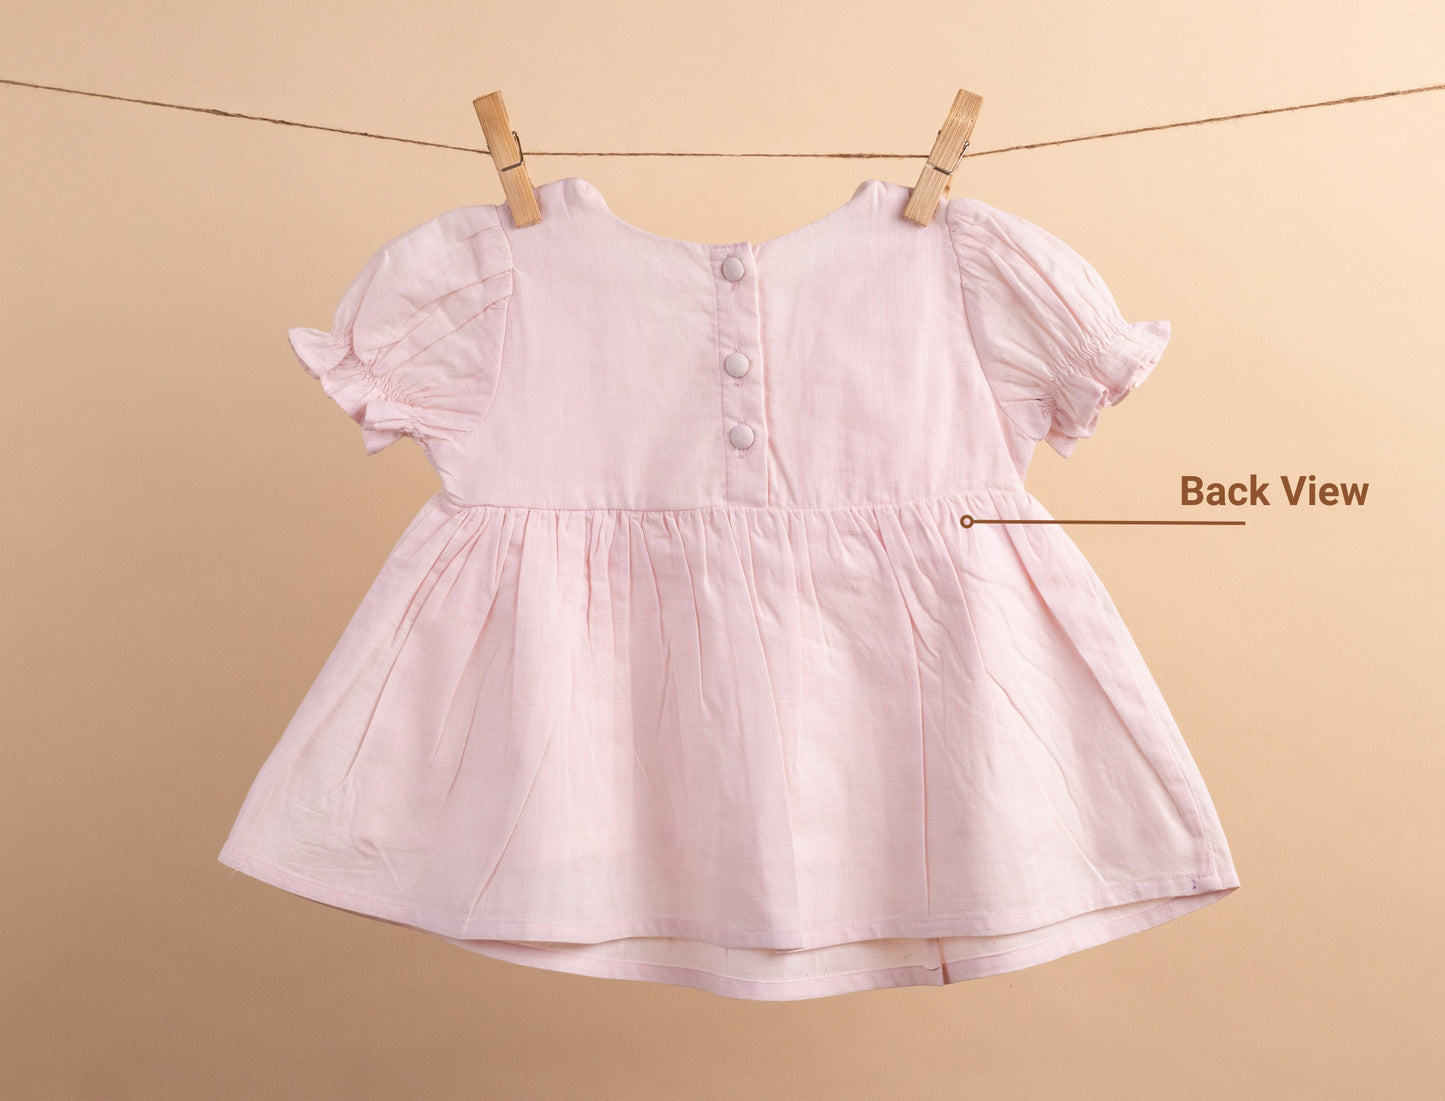 New Born Infant Pure Cotton Hand Pin-tuck Frock Dress (Baby Pink)